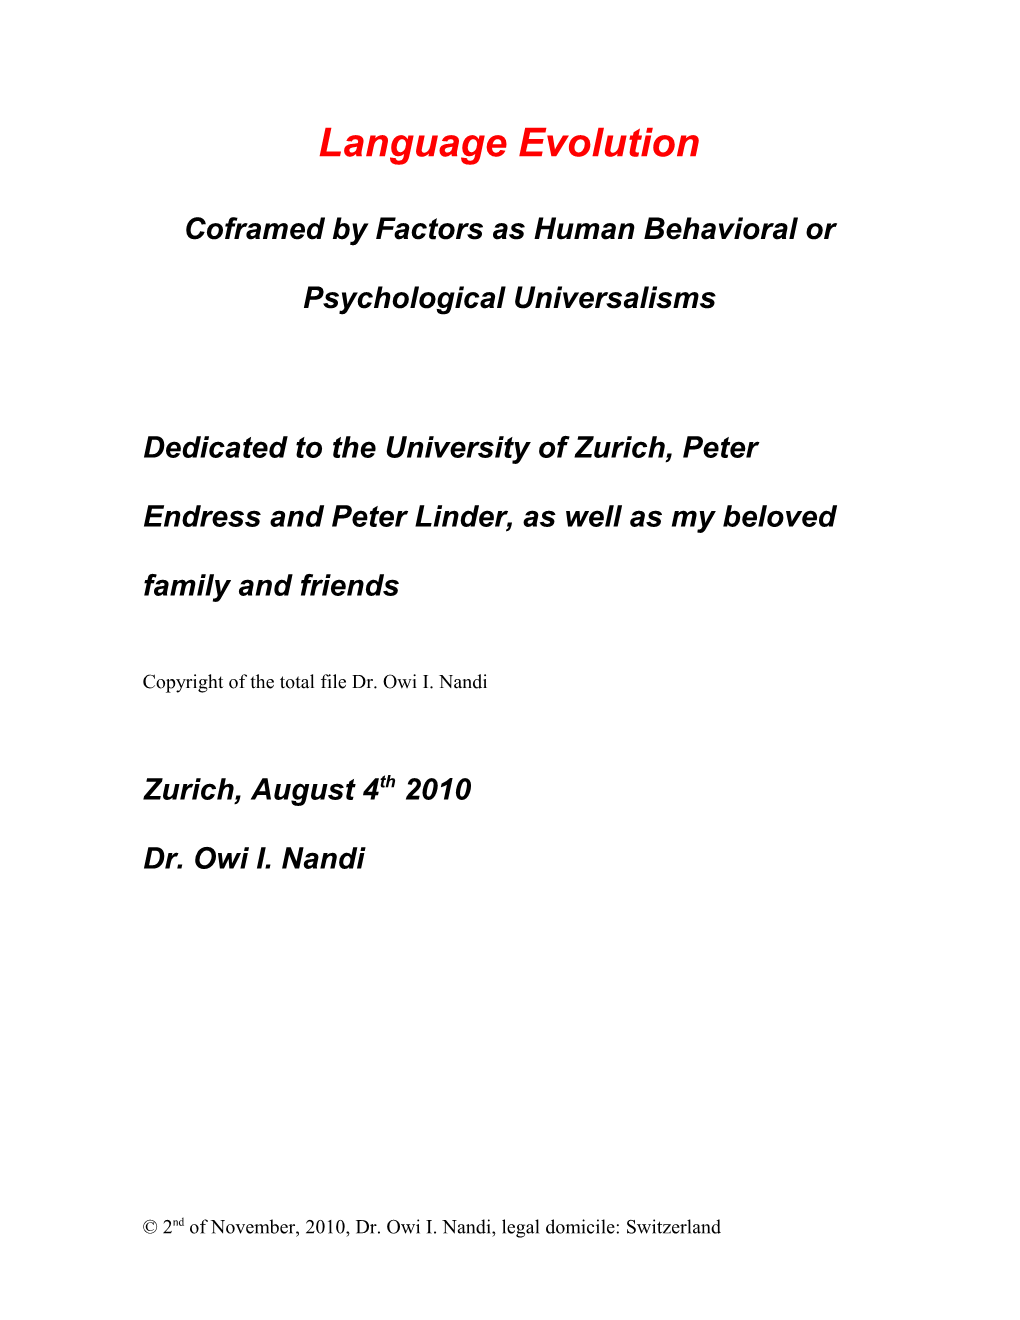 Coframed by Factors As Human Behavioral Or Psychological Universalisms